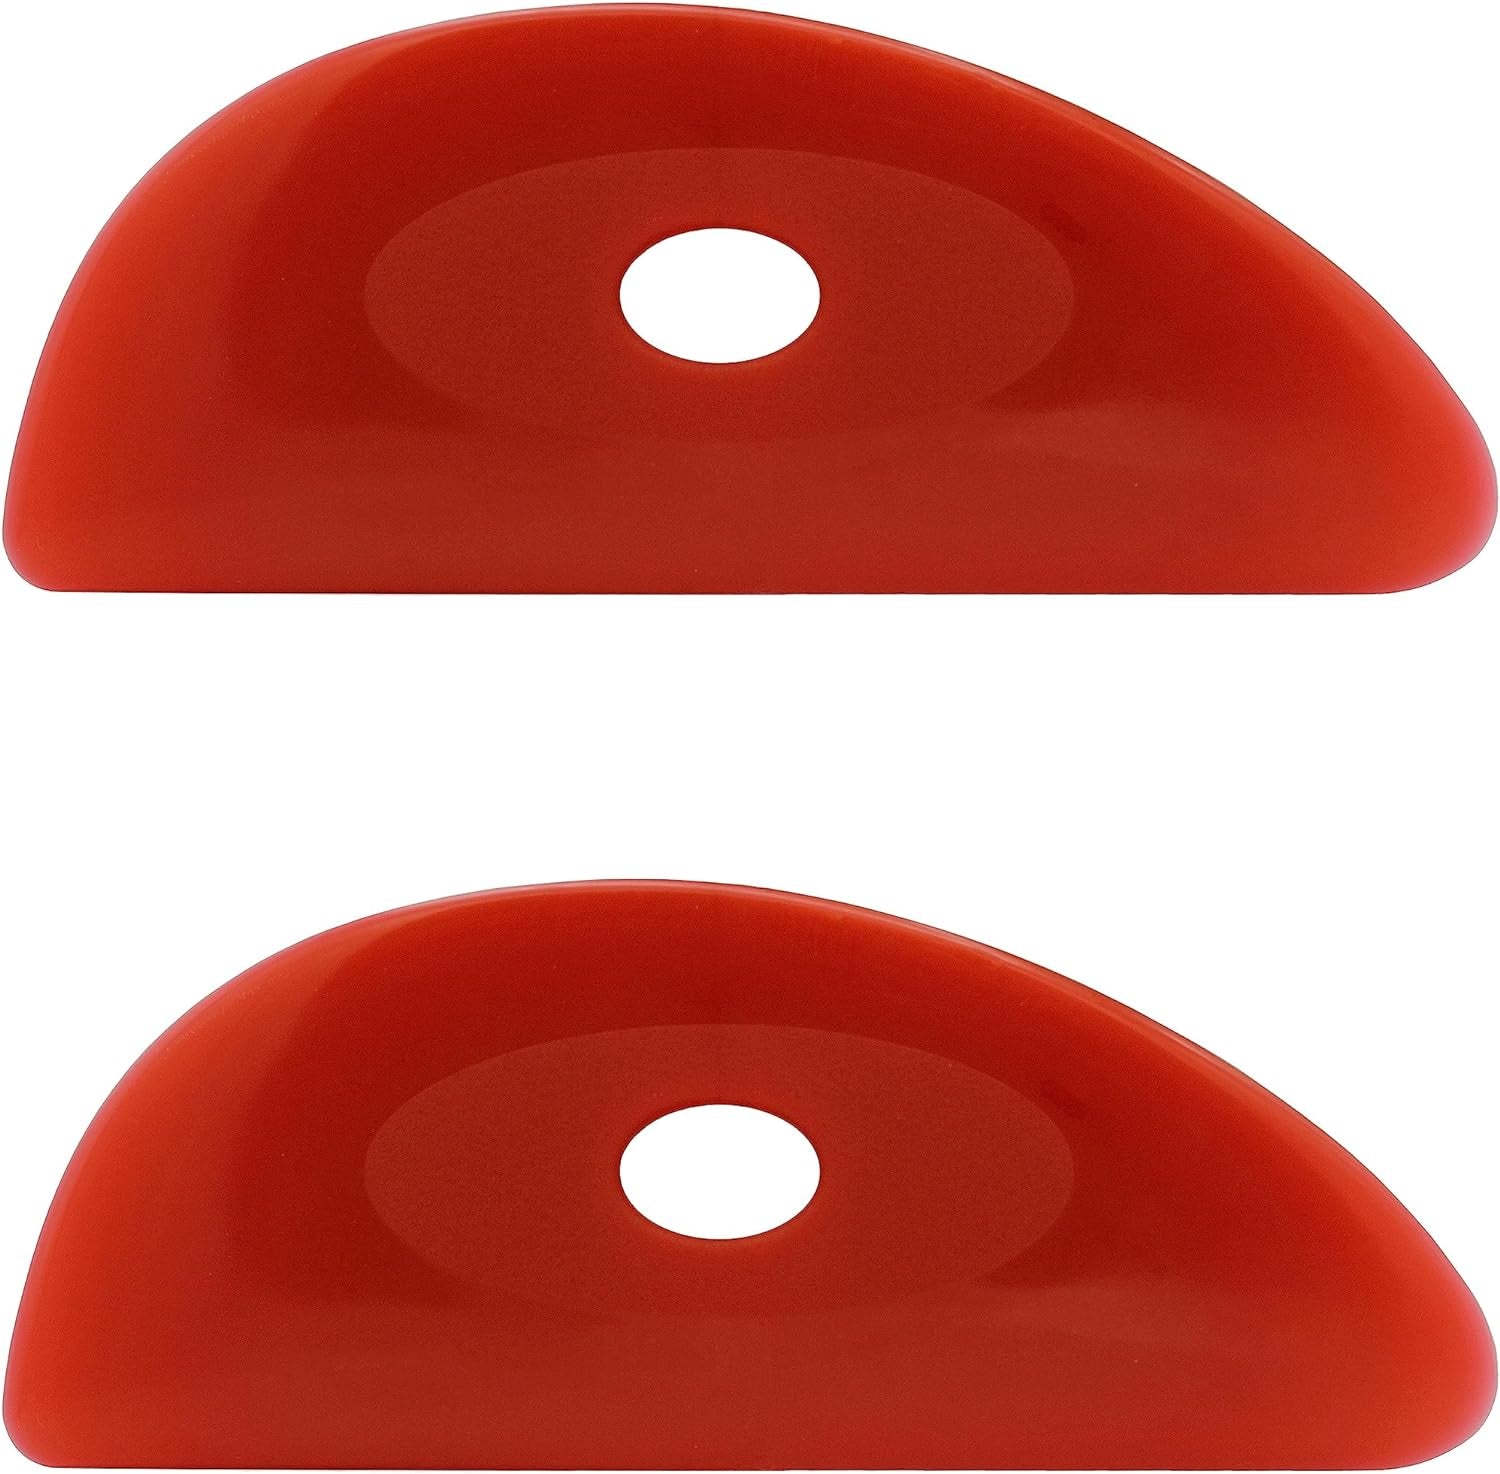 Red Soft Silicone Pottery Ribs - Pack of 2